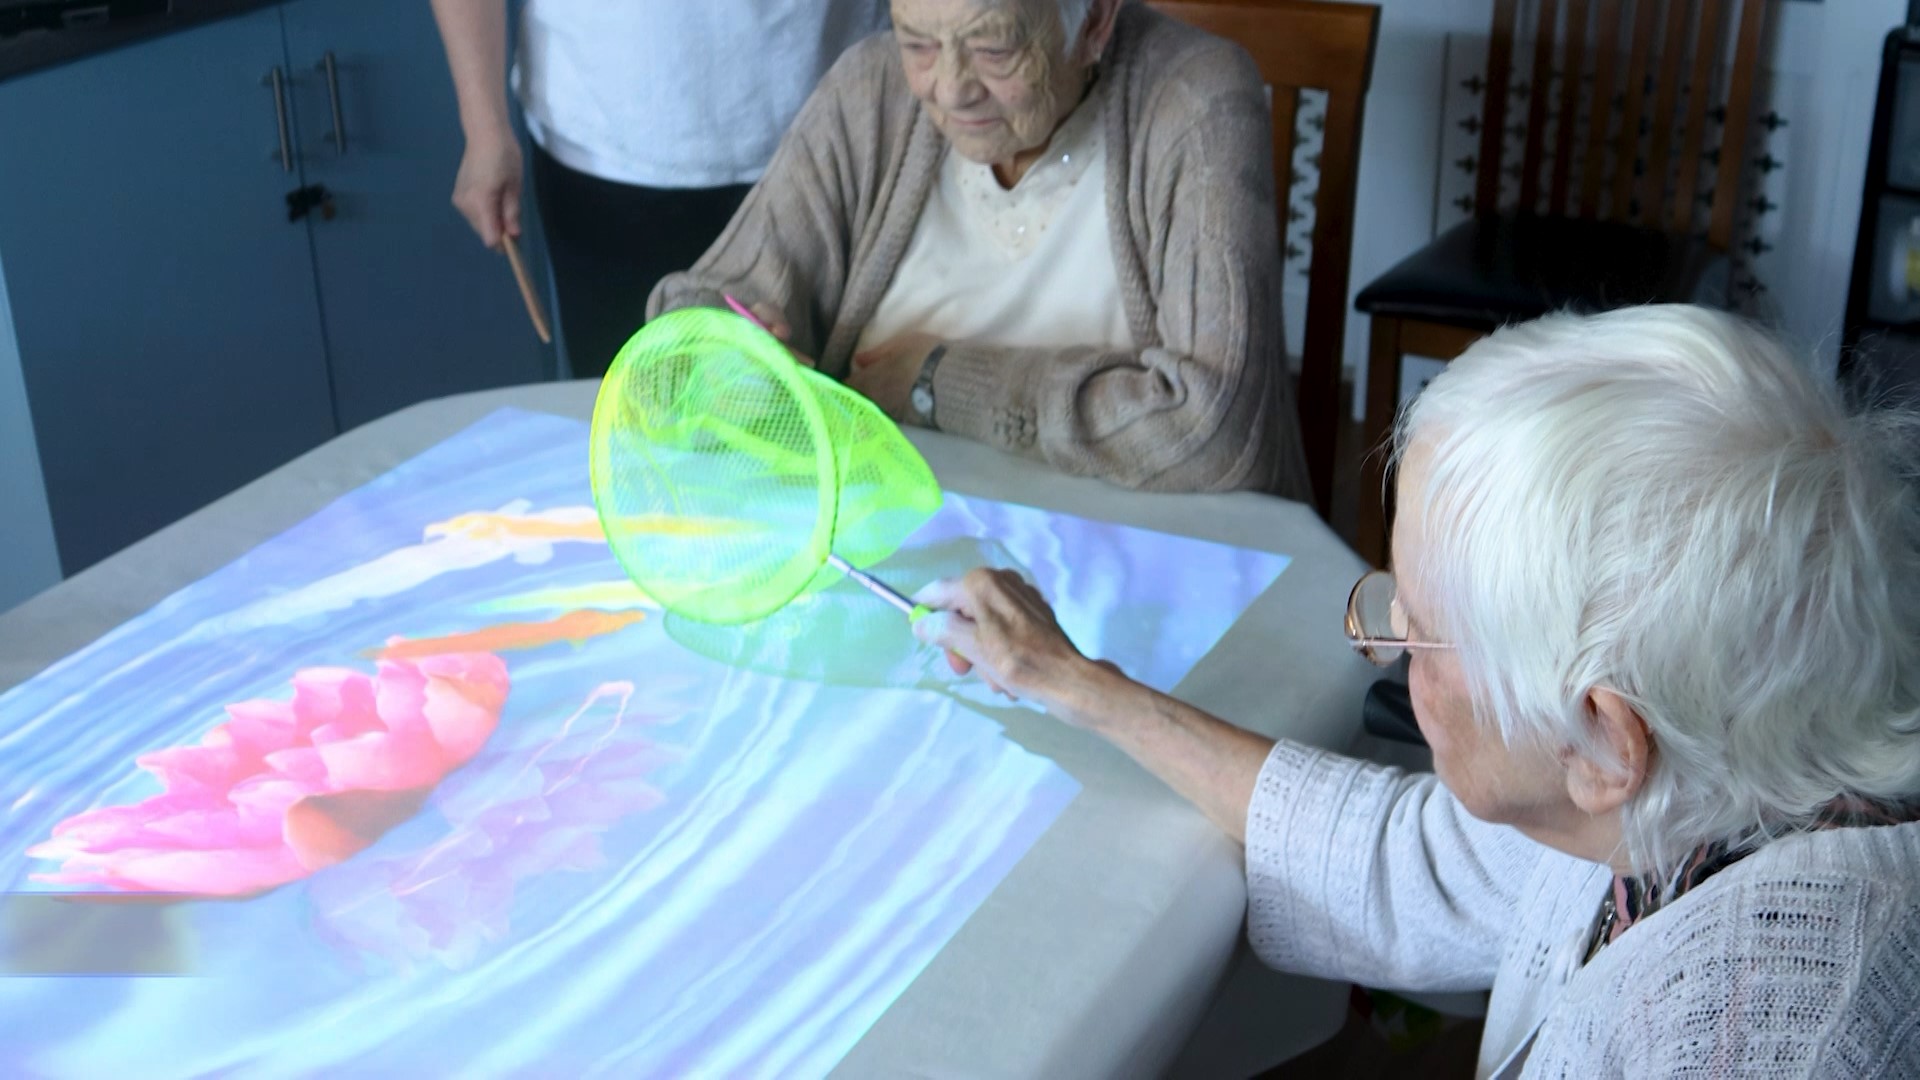 Two elderly ladies are seated at a table, interacting with the interactive fish pond being displayed from the interactive projector, the women are happily trying to catch the fish with a fishing net.